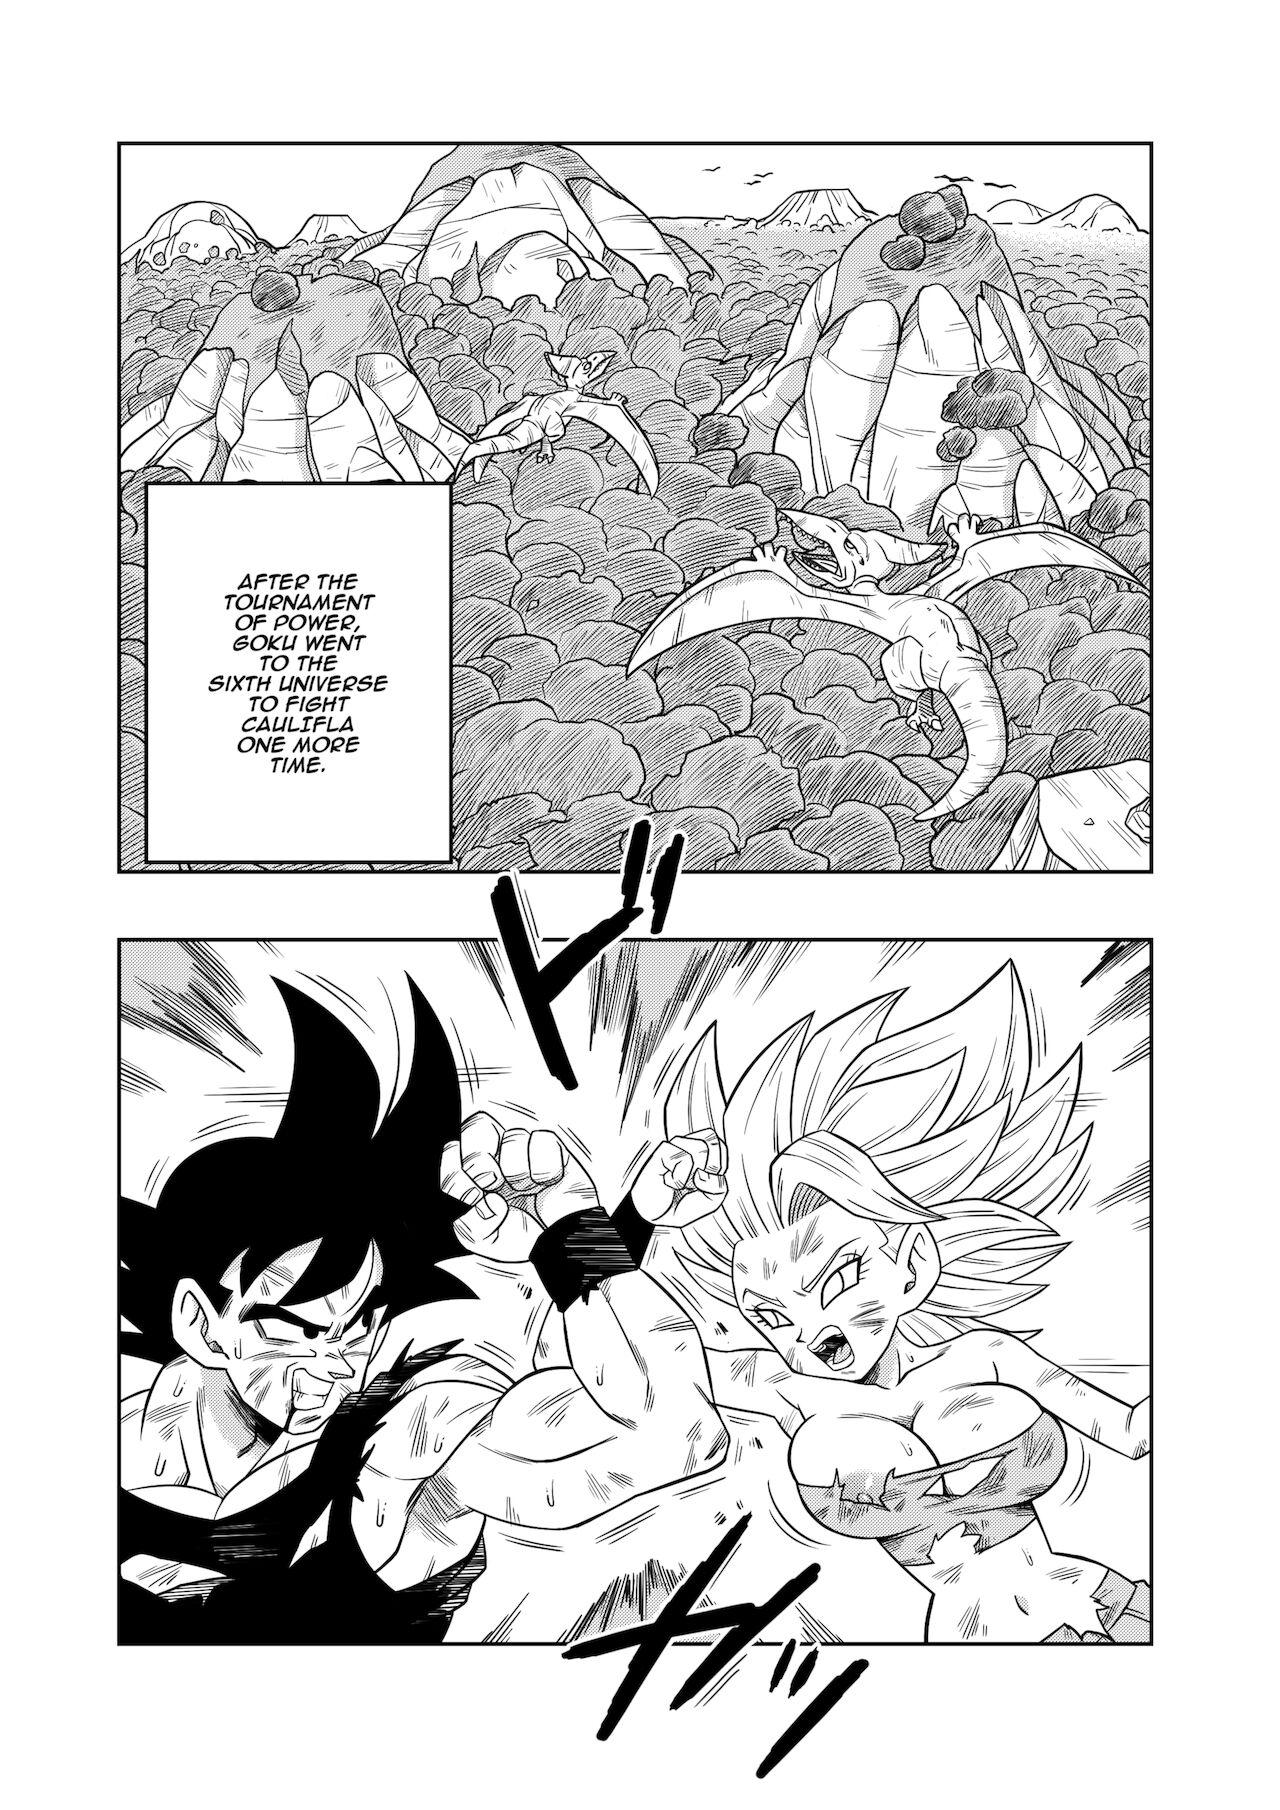 Ecuador Fight in the 6th Universe!!! - Dragon ball super Gay Ass Fucking - Page 3